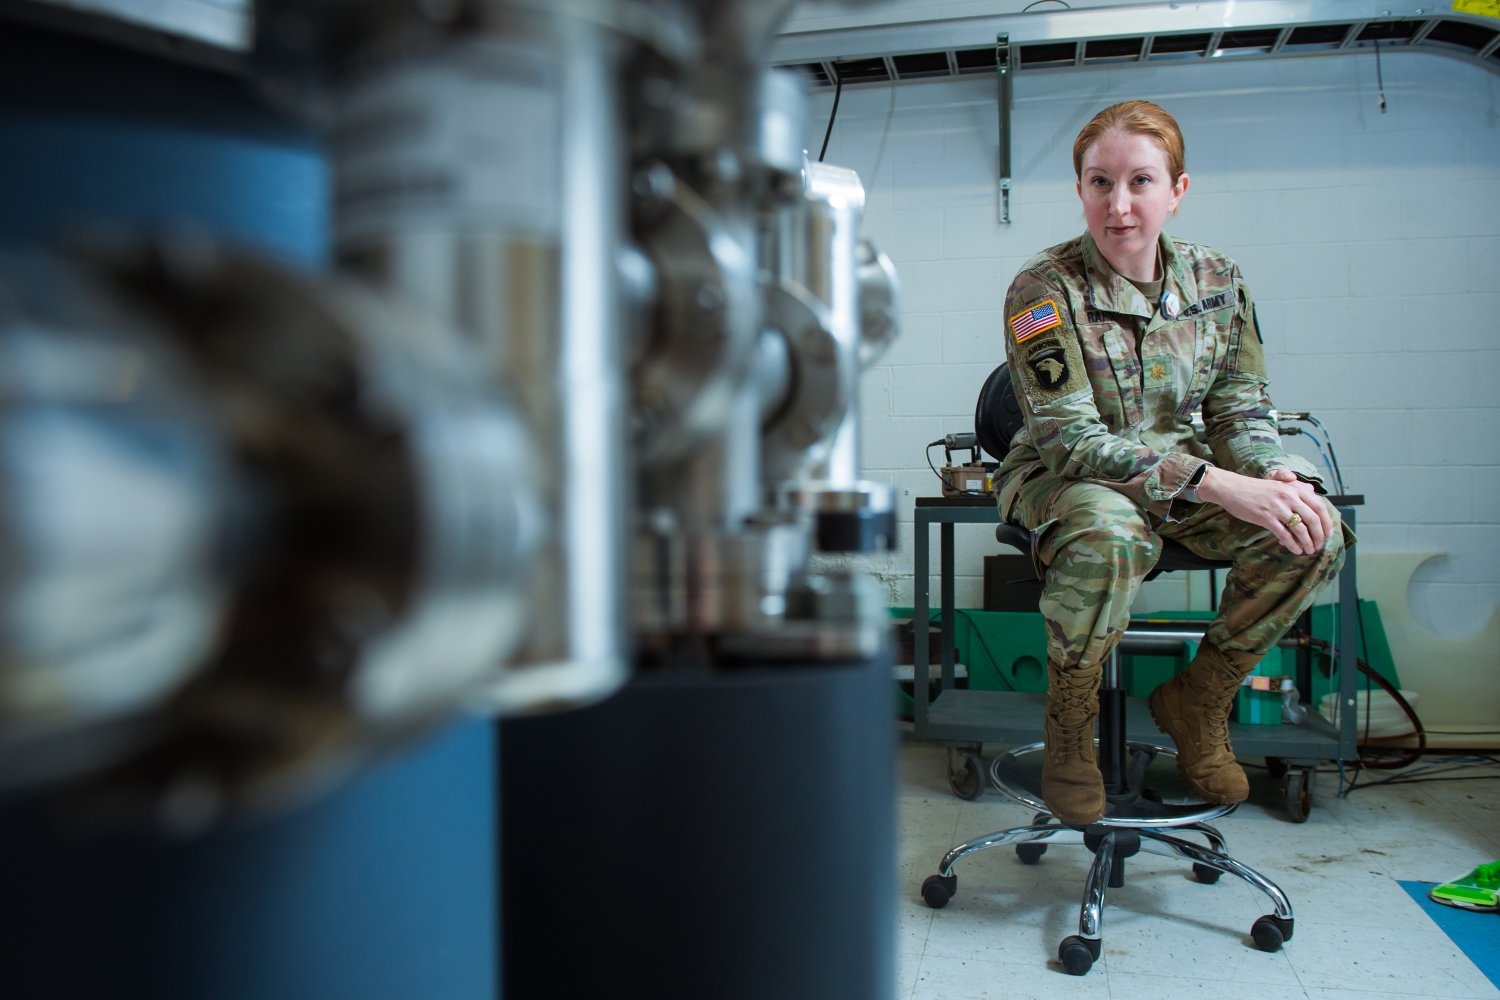 Jill Rahon developed her own research project with minimal help while raising twins, studying applied nuclear physics, and flying coalition forces into Taliban territory while evading ground fire.